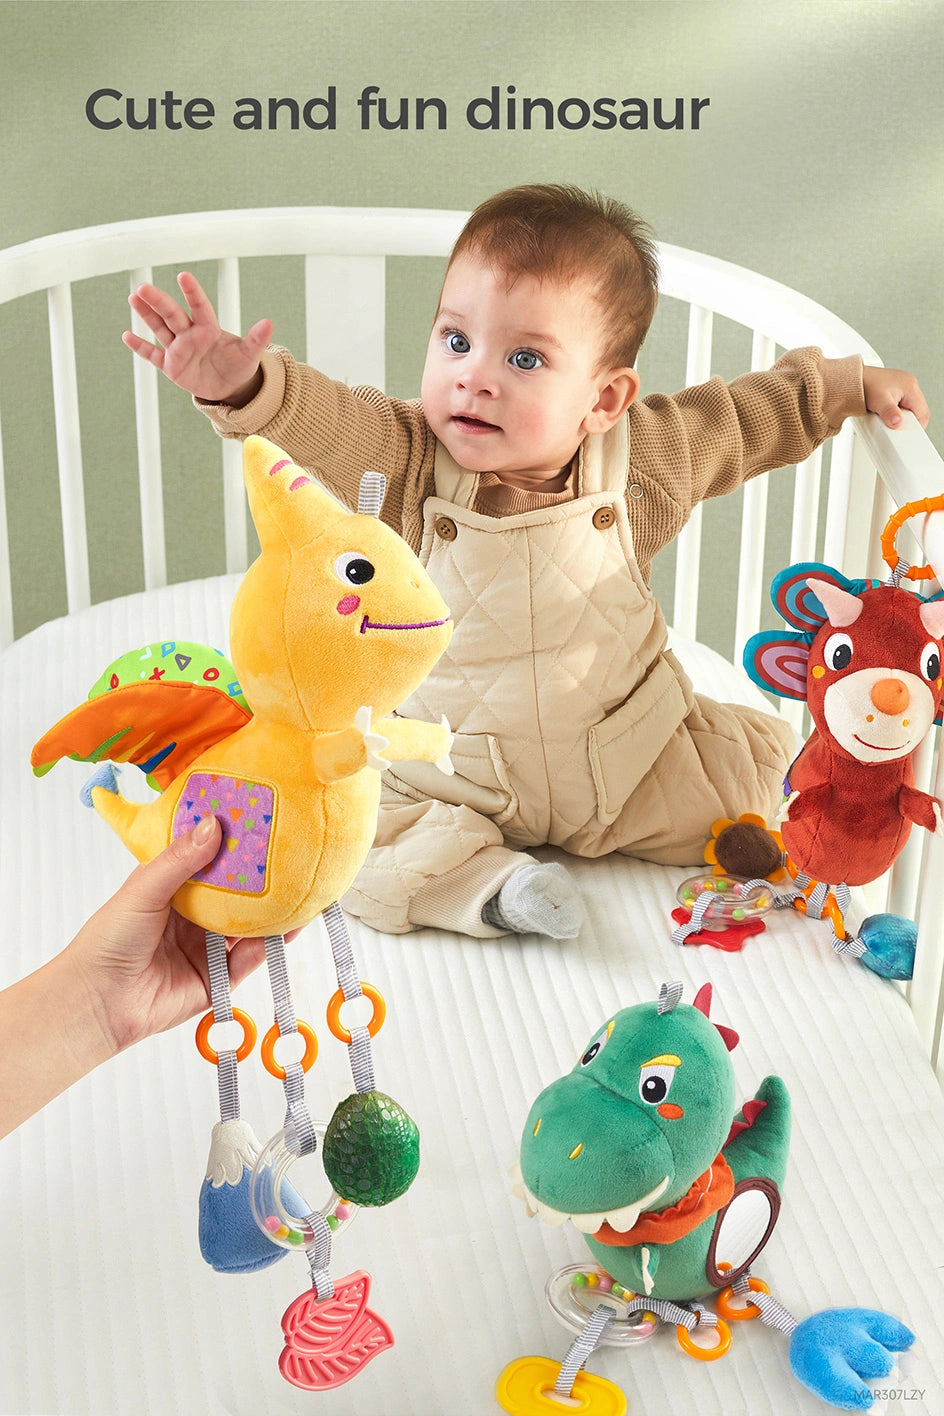 Sensory play with crinkle squeaky toys for infant development